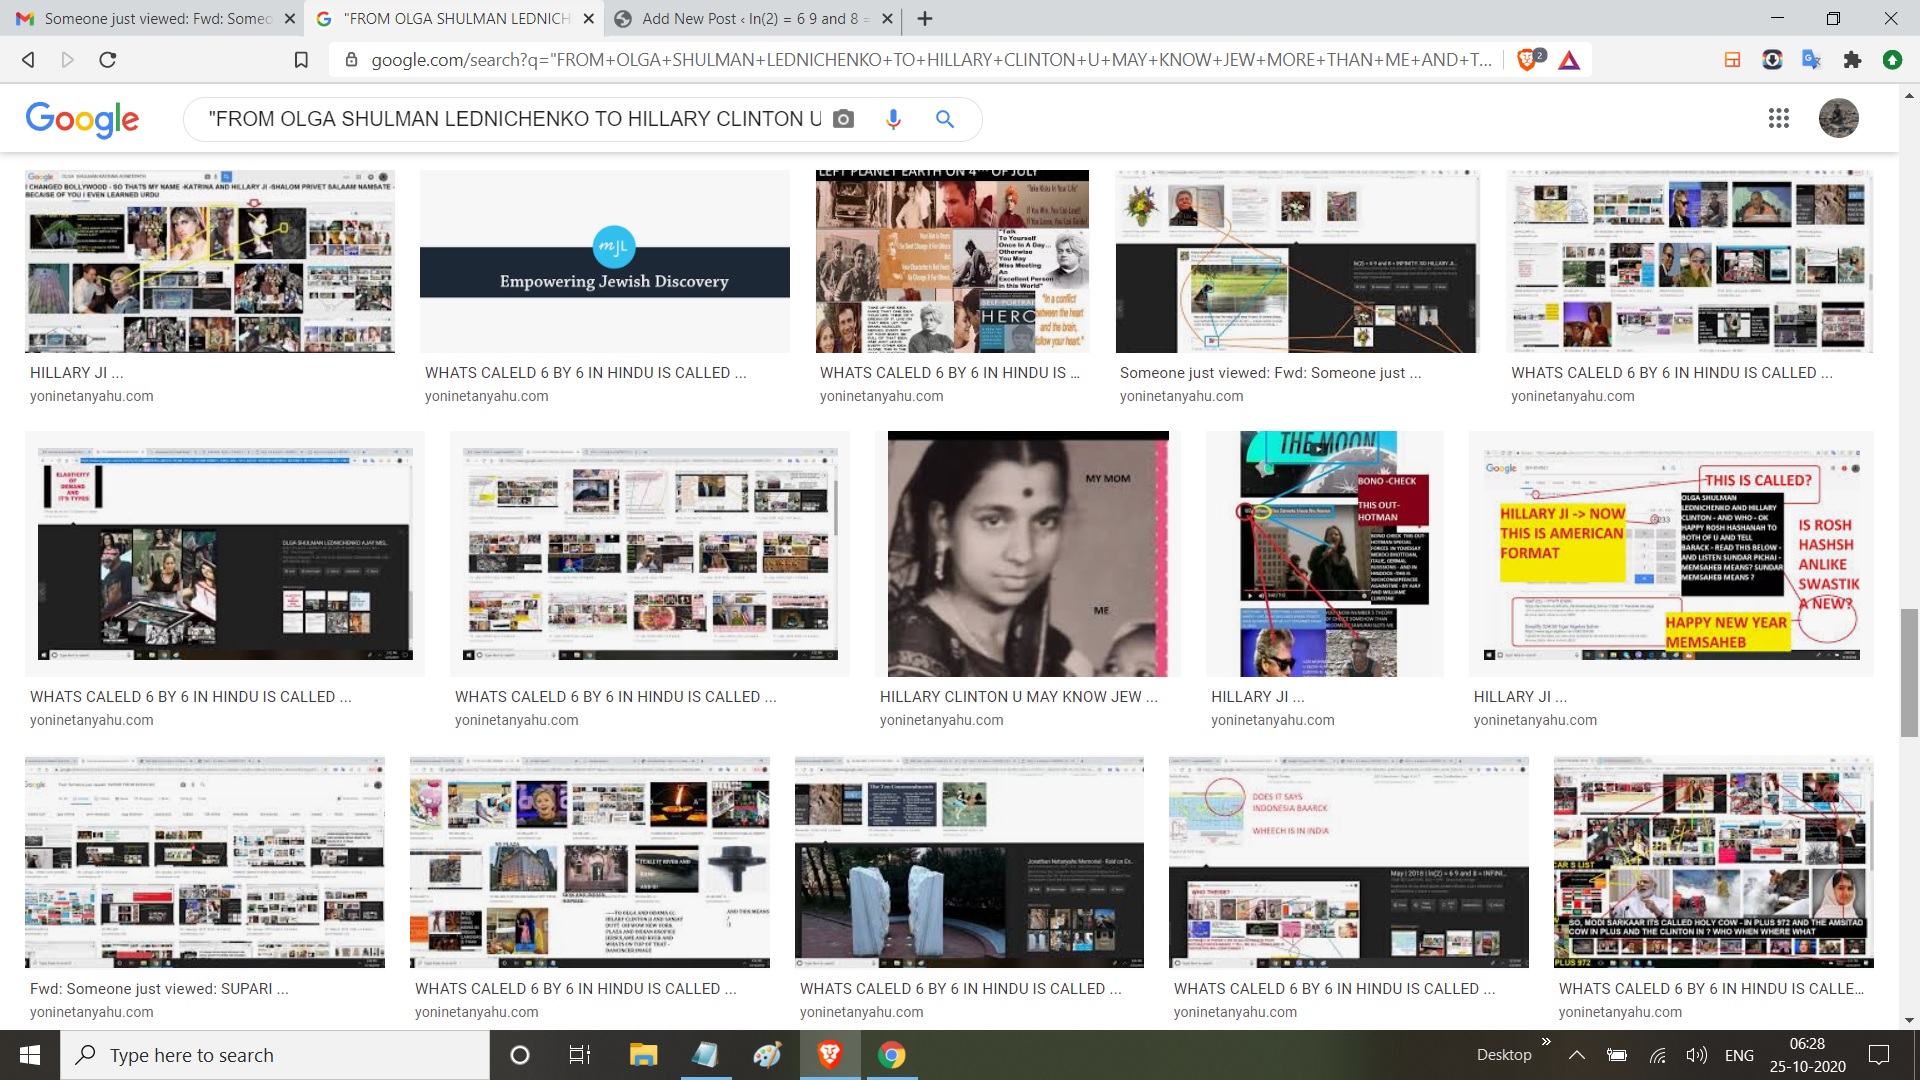 FROM OLGA SHULMAN LEDNICHENKO TO HILLARY CLINTON U MAY KNOW JEW MORE THAN ME AND THAT NO ONE CAN DOUBT BUT DOE OBAMA FAMILY AND MODI AND BOLLYWOOD KNOW INDIA AND ISAREL MORE THAN ME IF I OWN AJAY